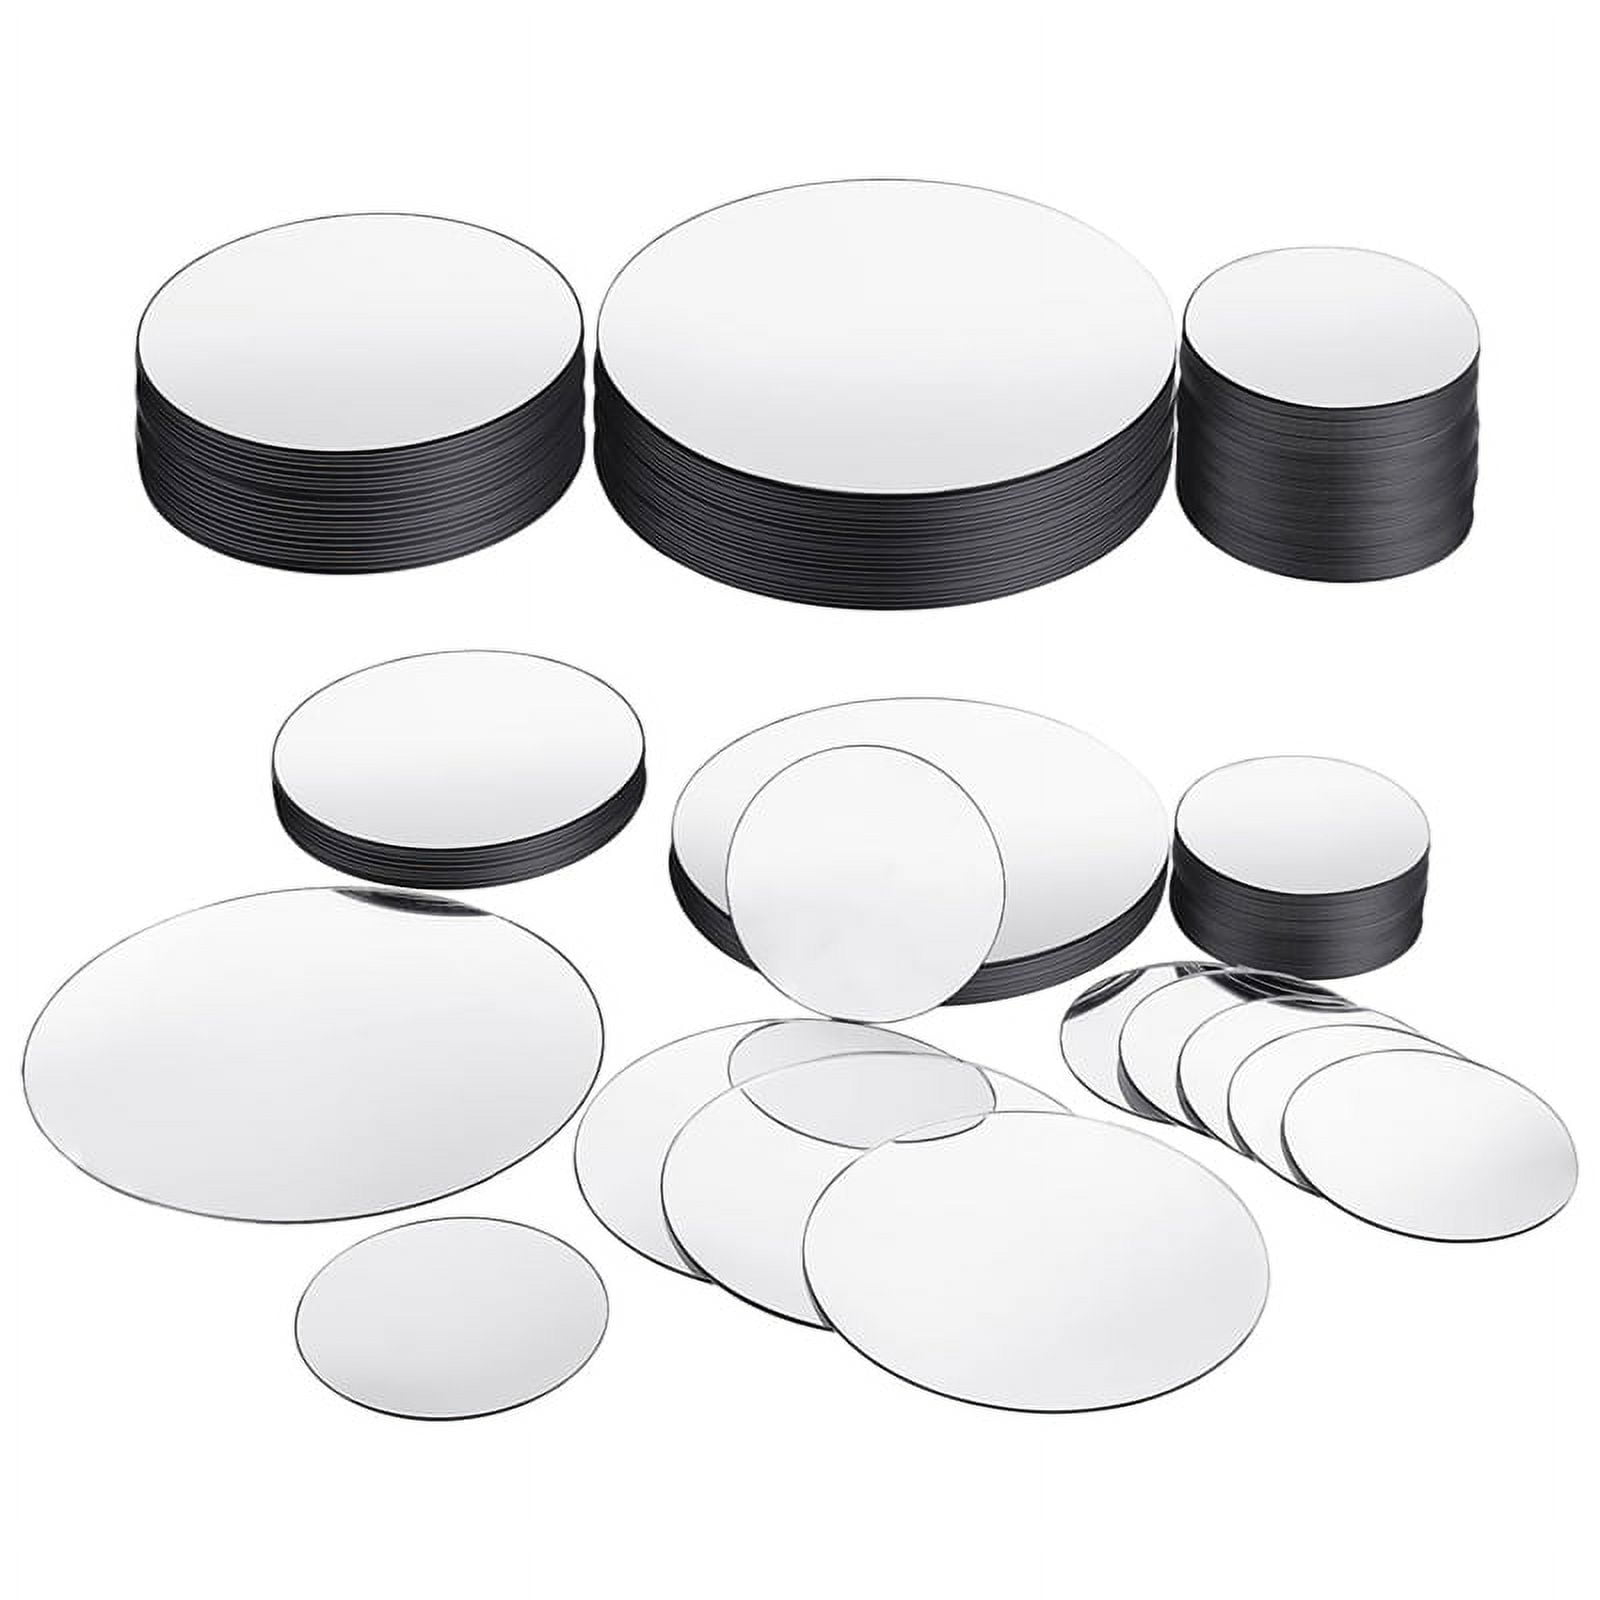 DARENYI 30Pcs Round Mirror 5cm Mirror Tiles Self Adhesive Acrylic Small  Mirror Round Wall Mirror Stick on Mirrors for Home Living Room Bedroom Decor